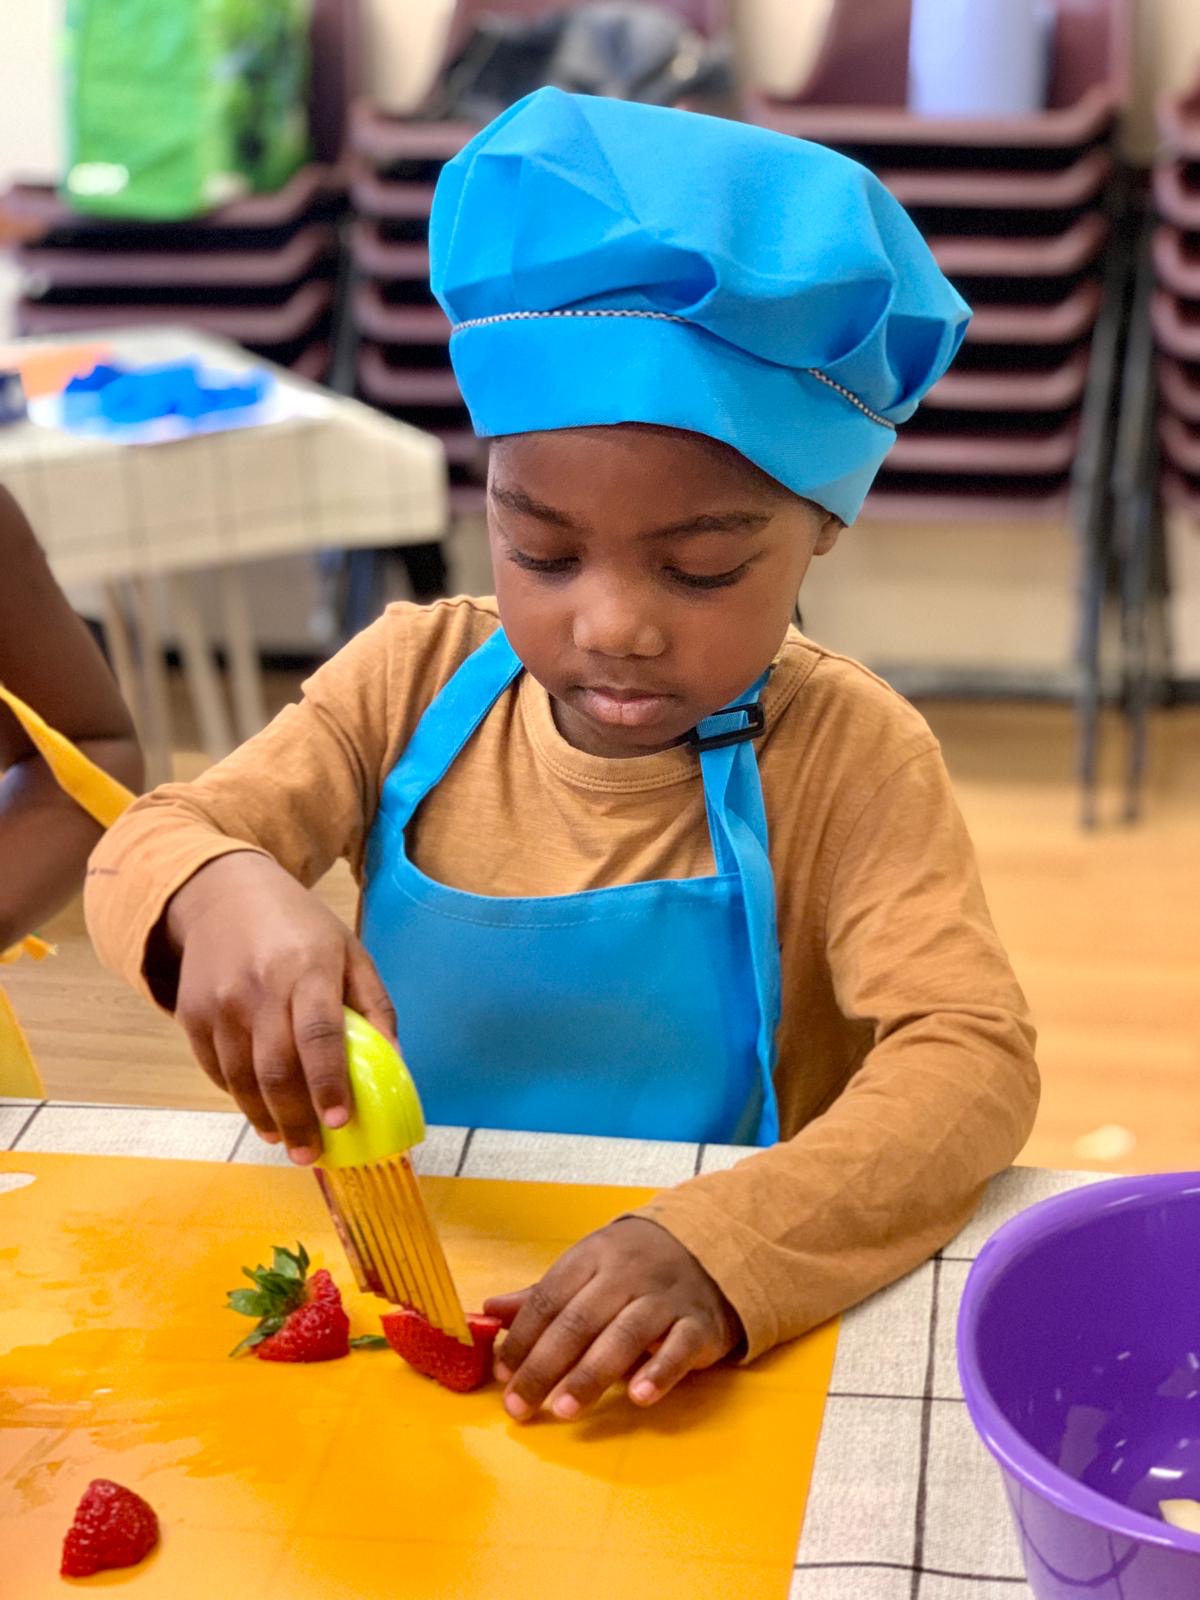 Photo of a very small child wearing a chefs hat and apron, cutting a strawberry